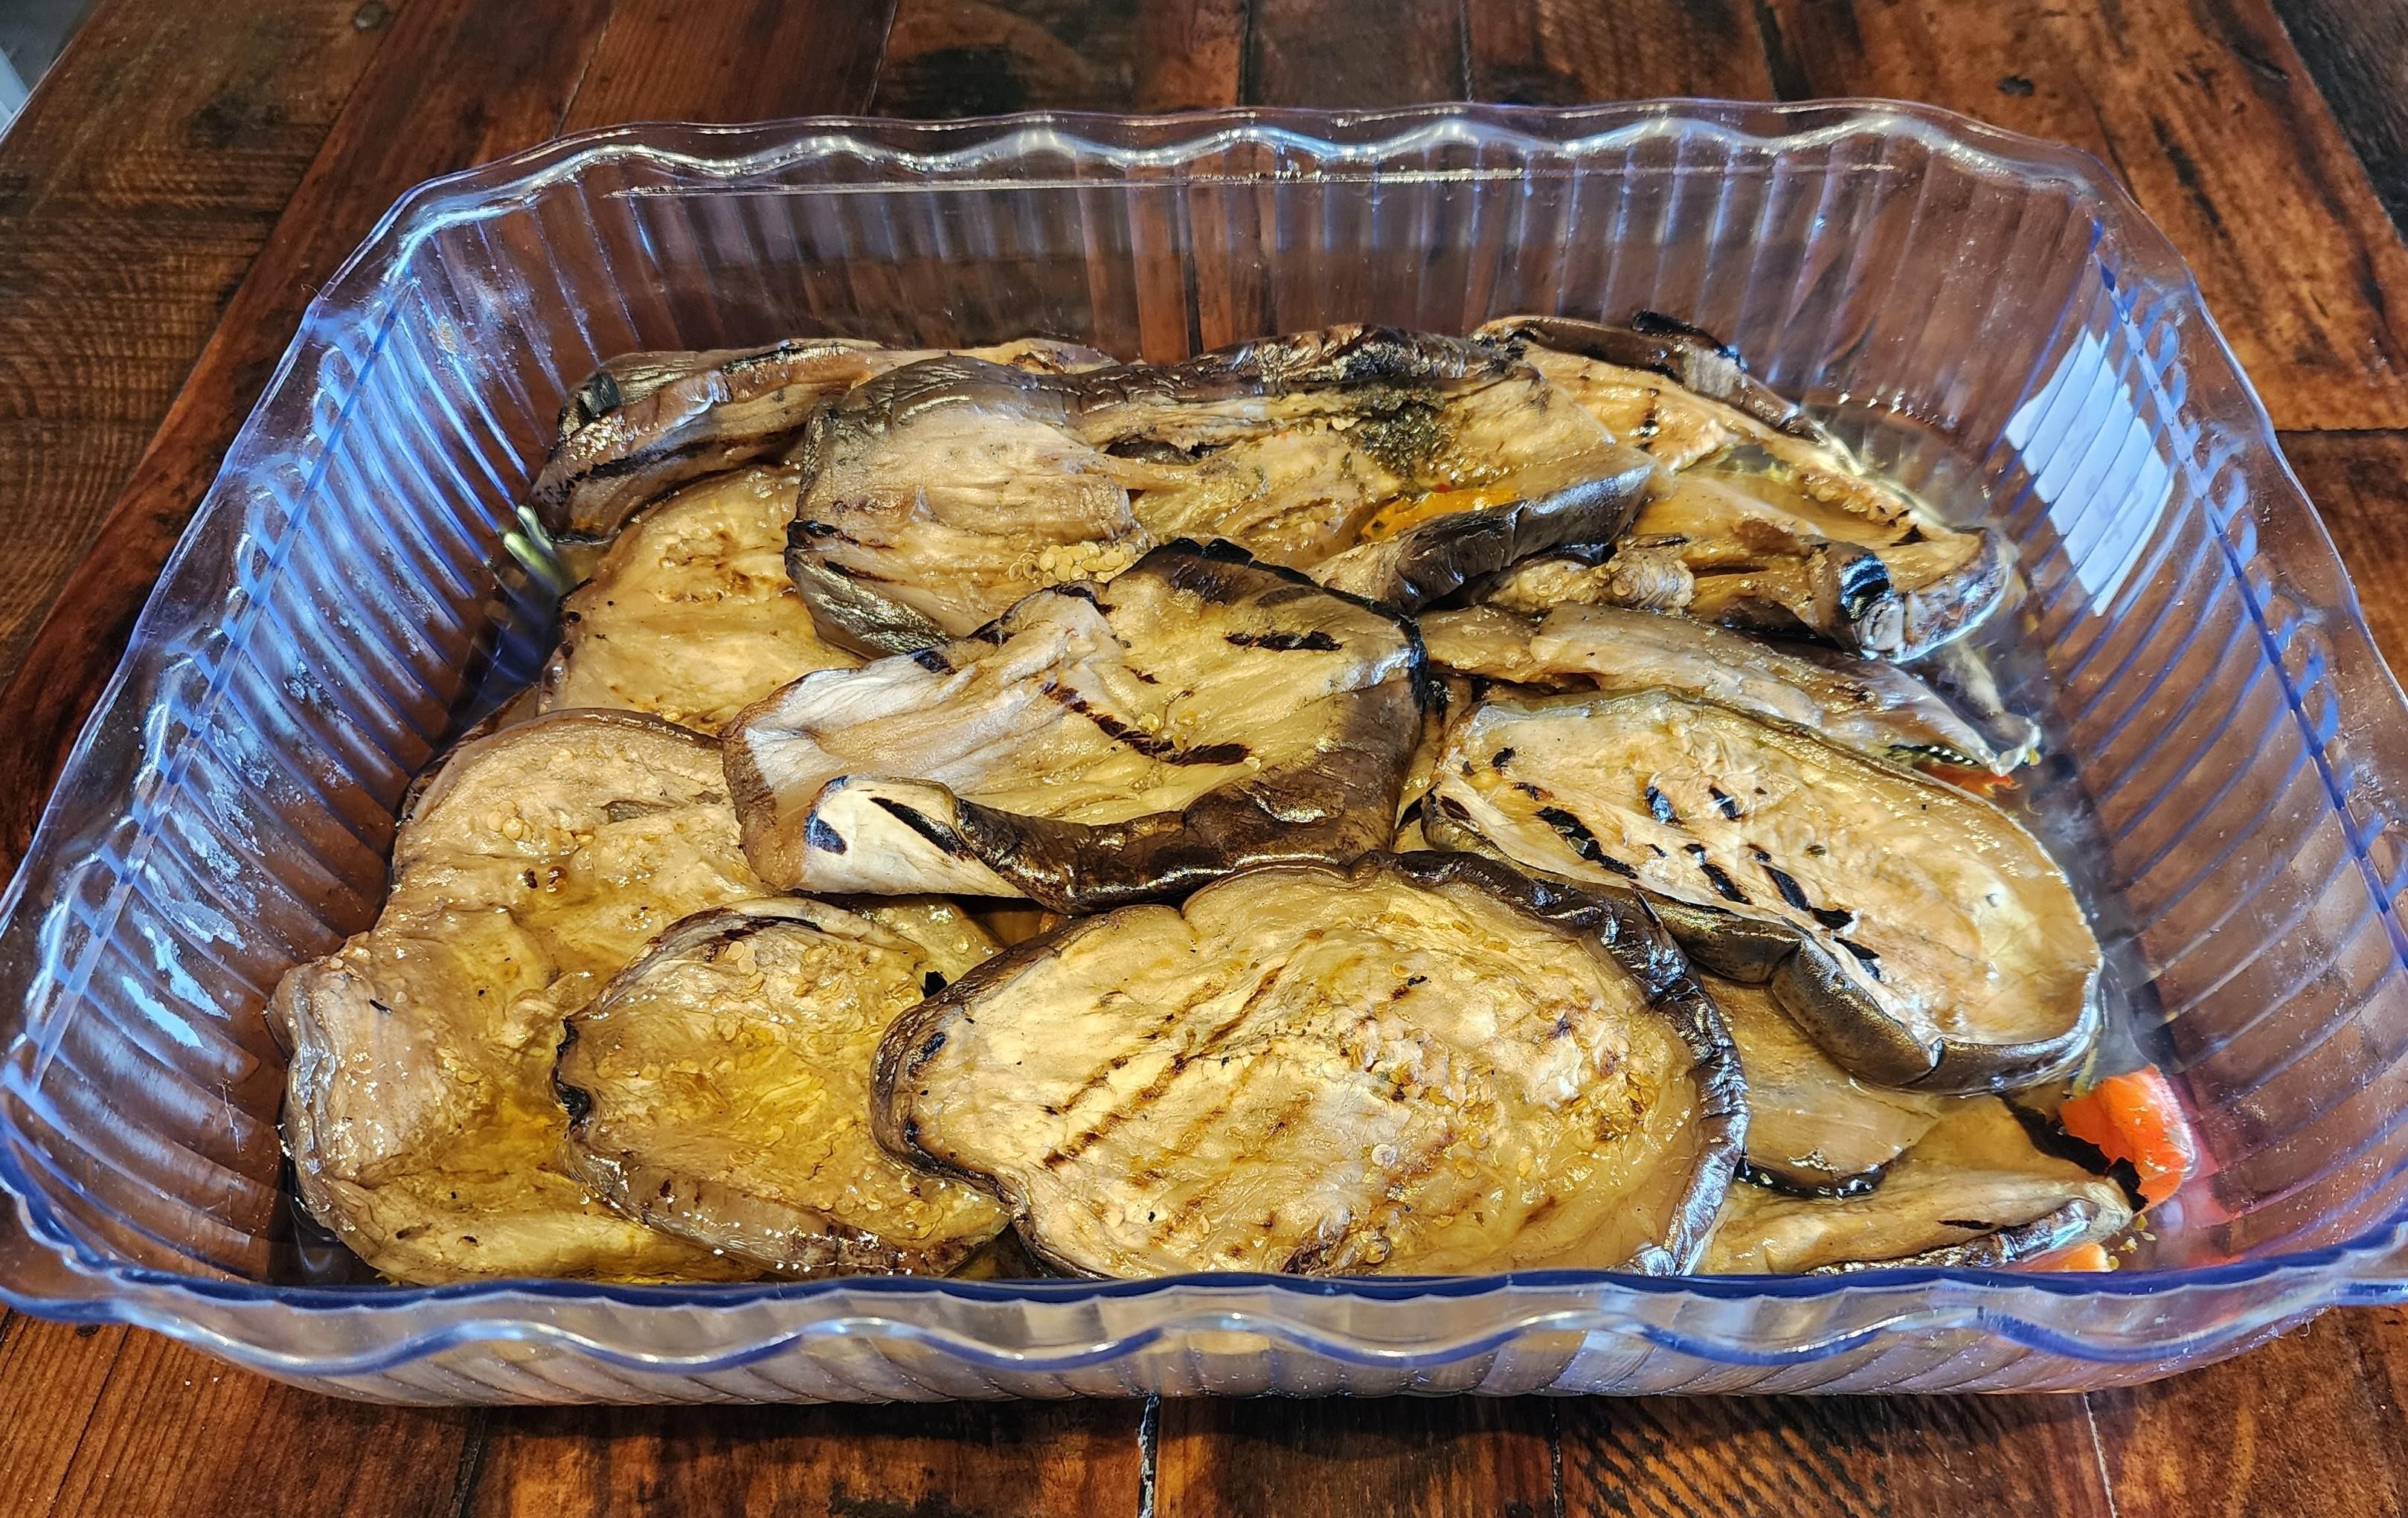 Grilled Eggplant - Small